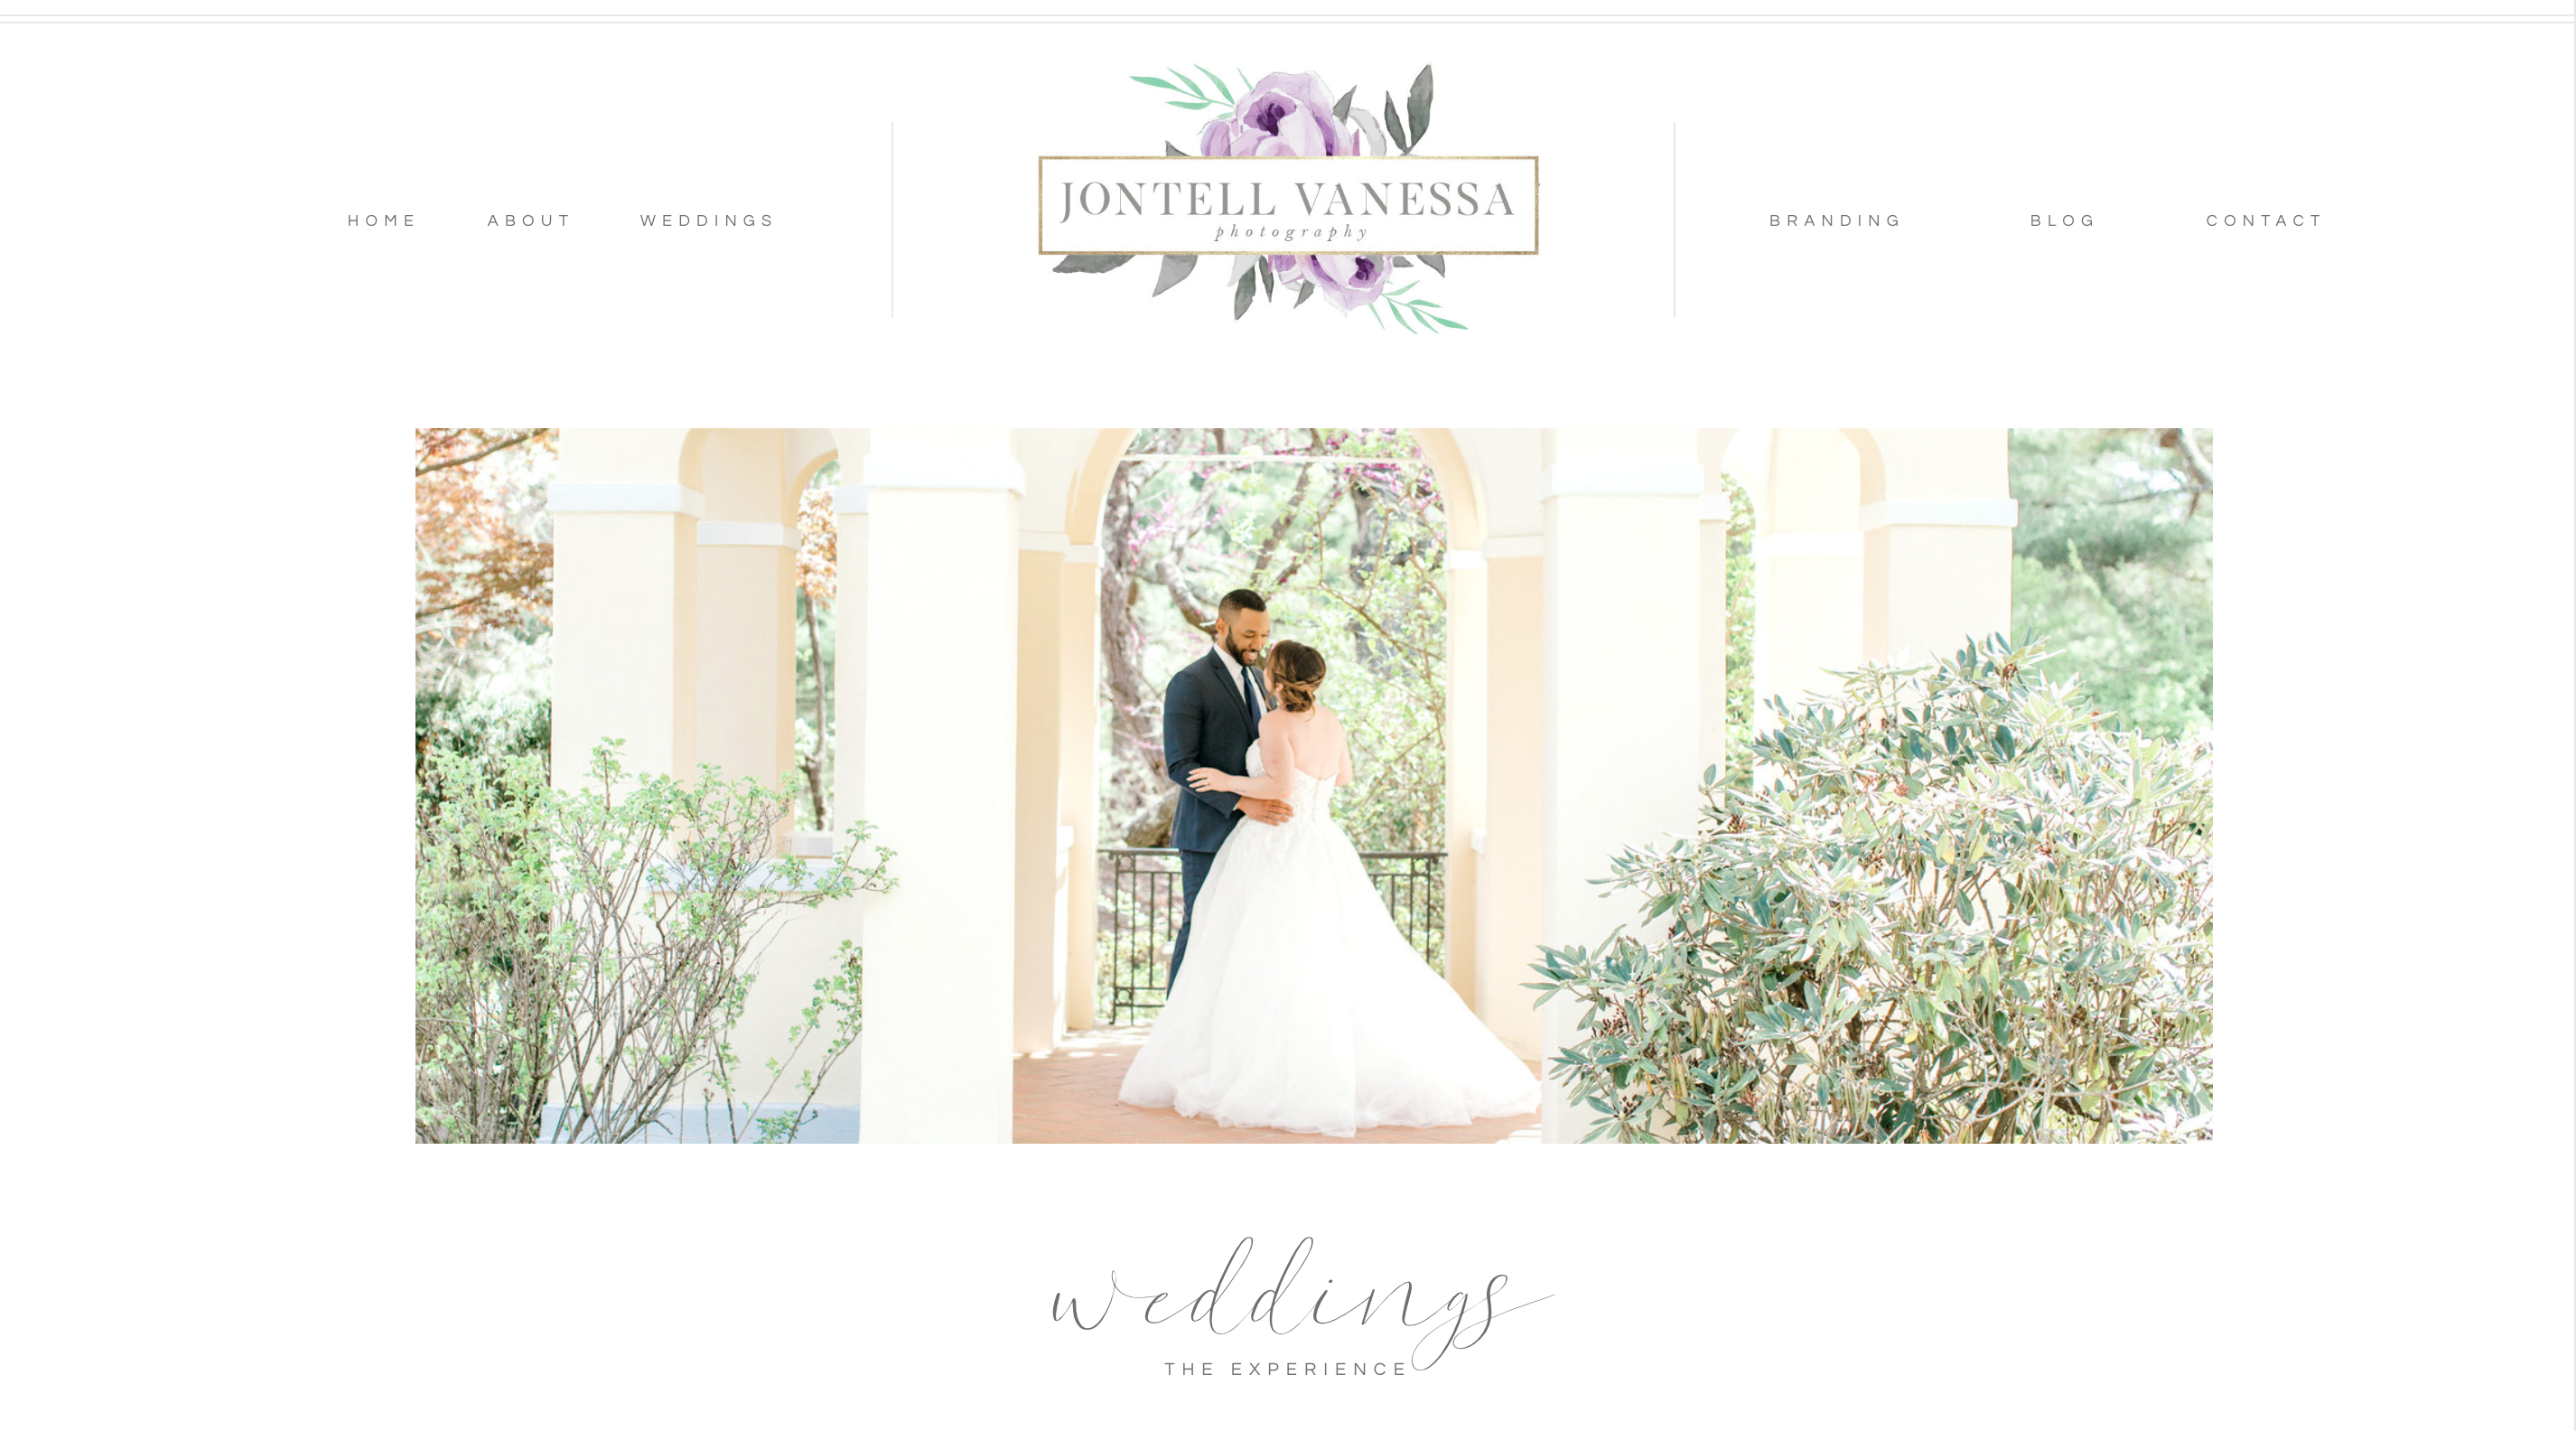 Wedding photographer "weddings" page that combines services and portfolio